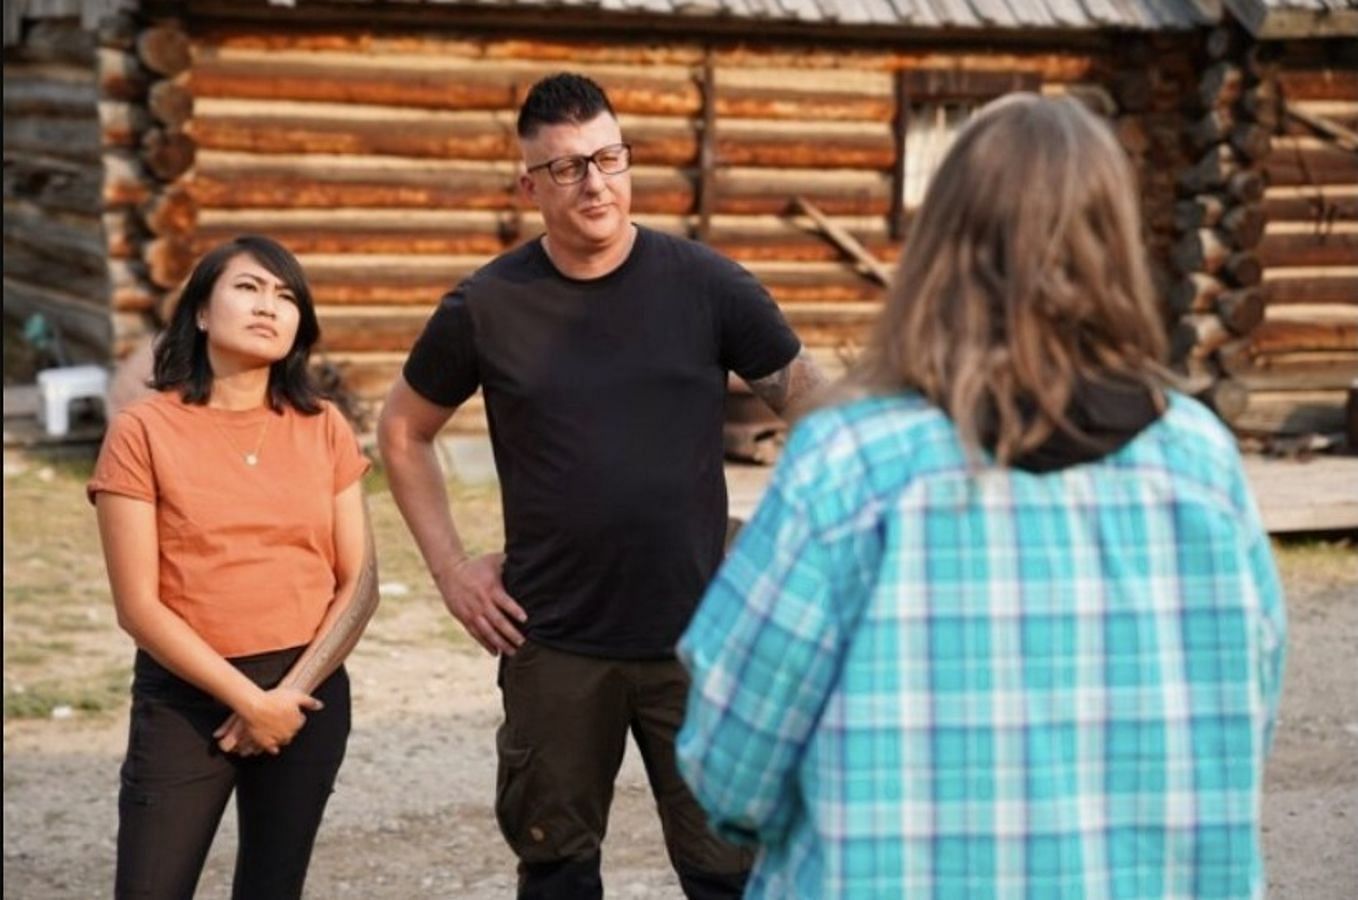 Co-hosts Tim Wood and Sapphire Sandalo in The Ghost Town Terror season 2 (Image via The Travel Channel)